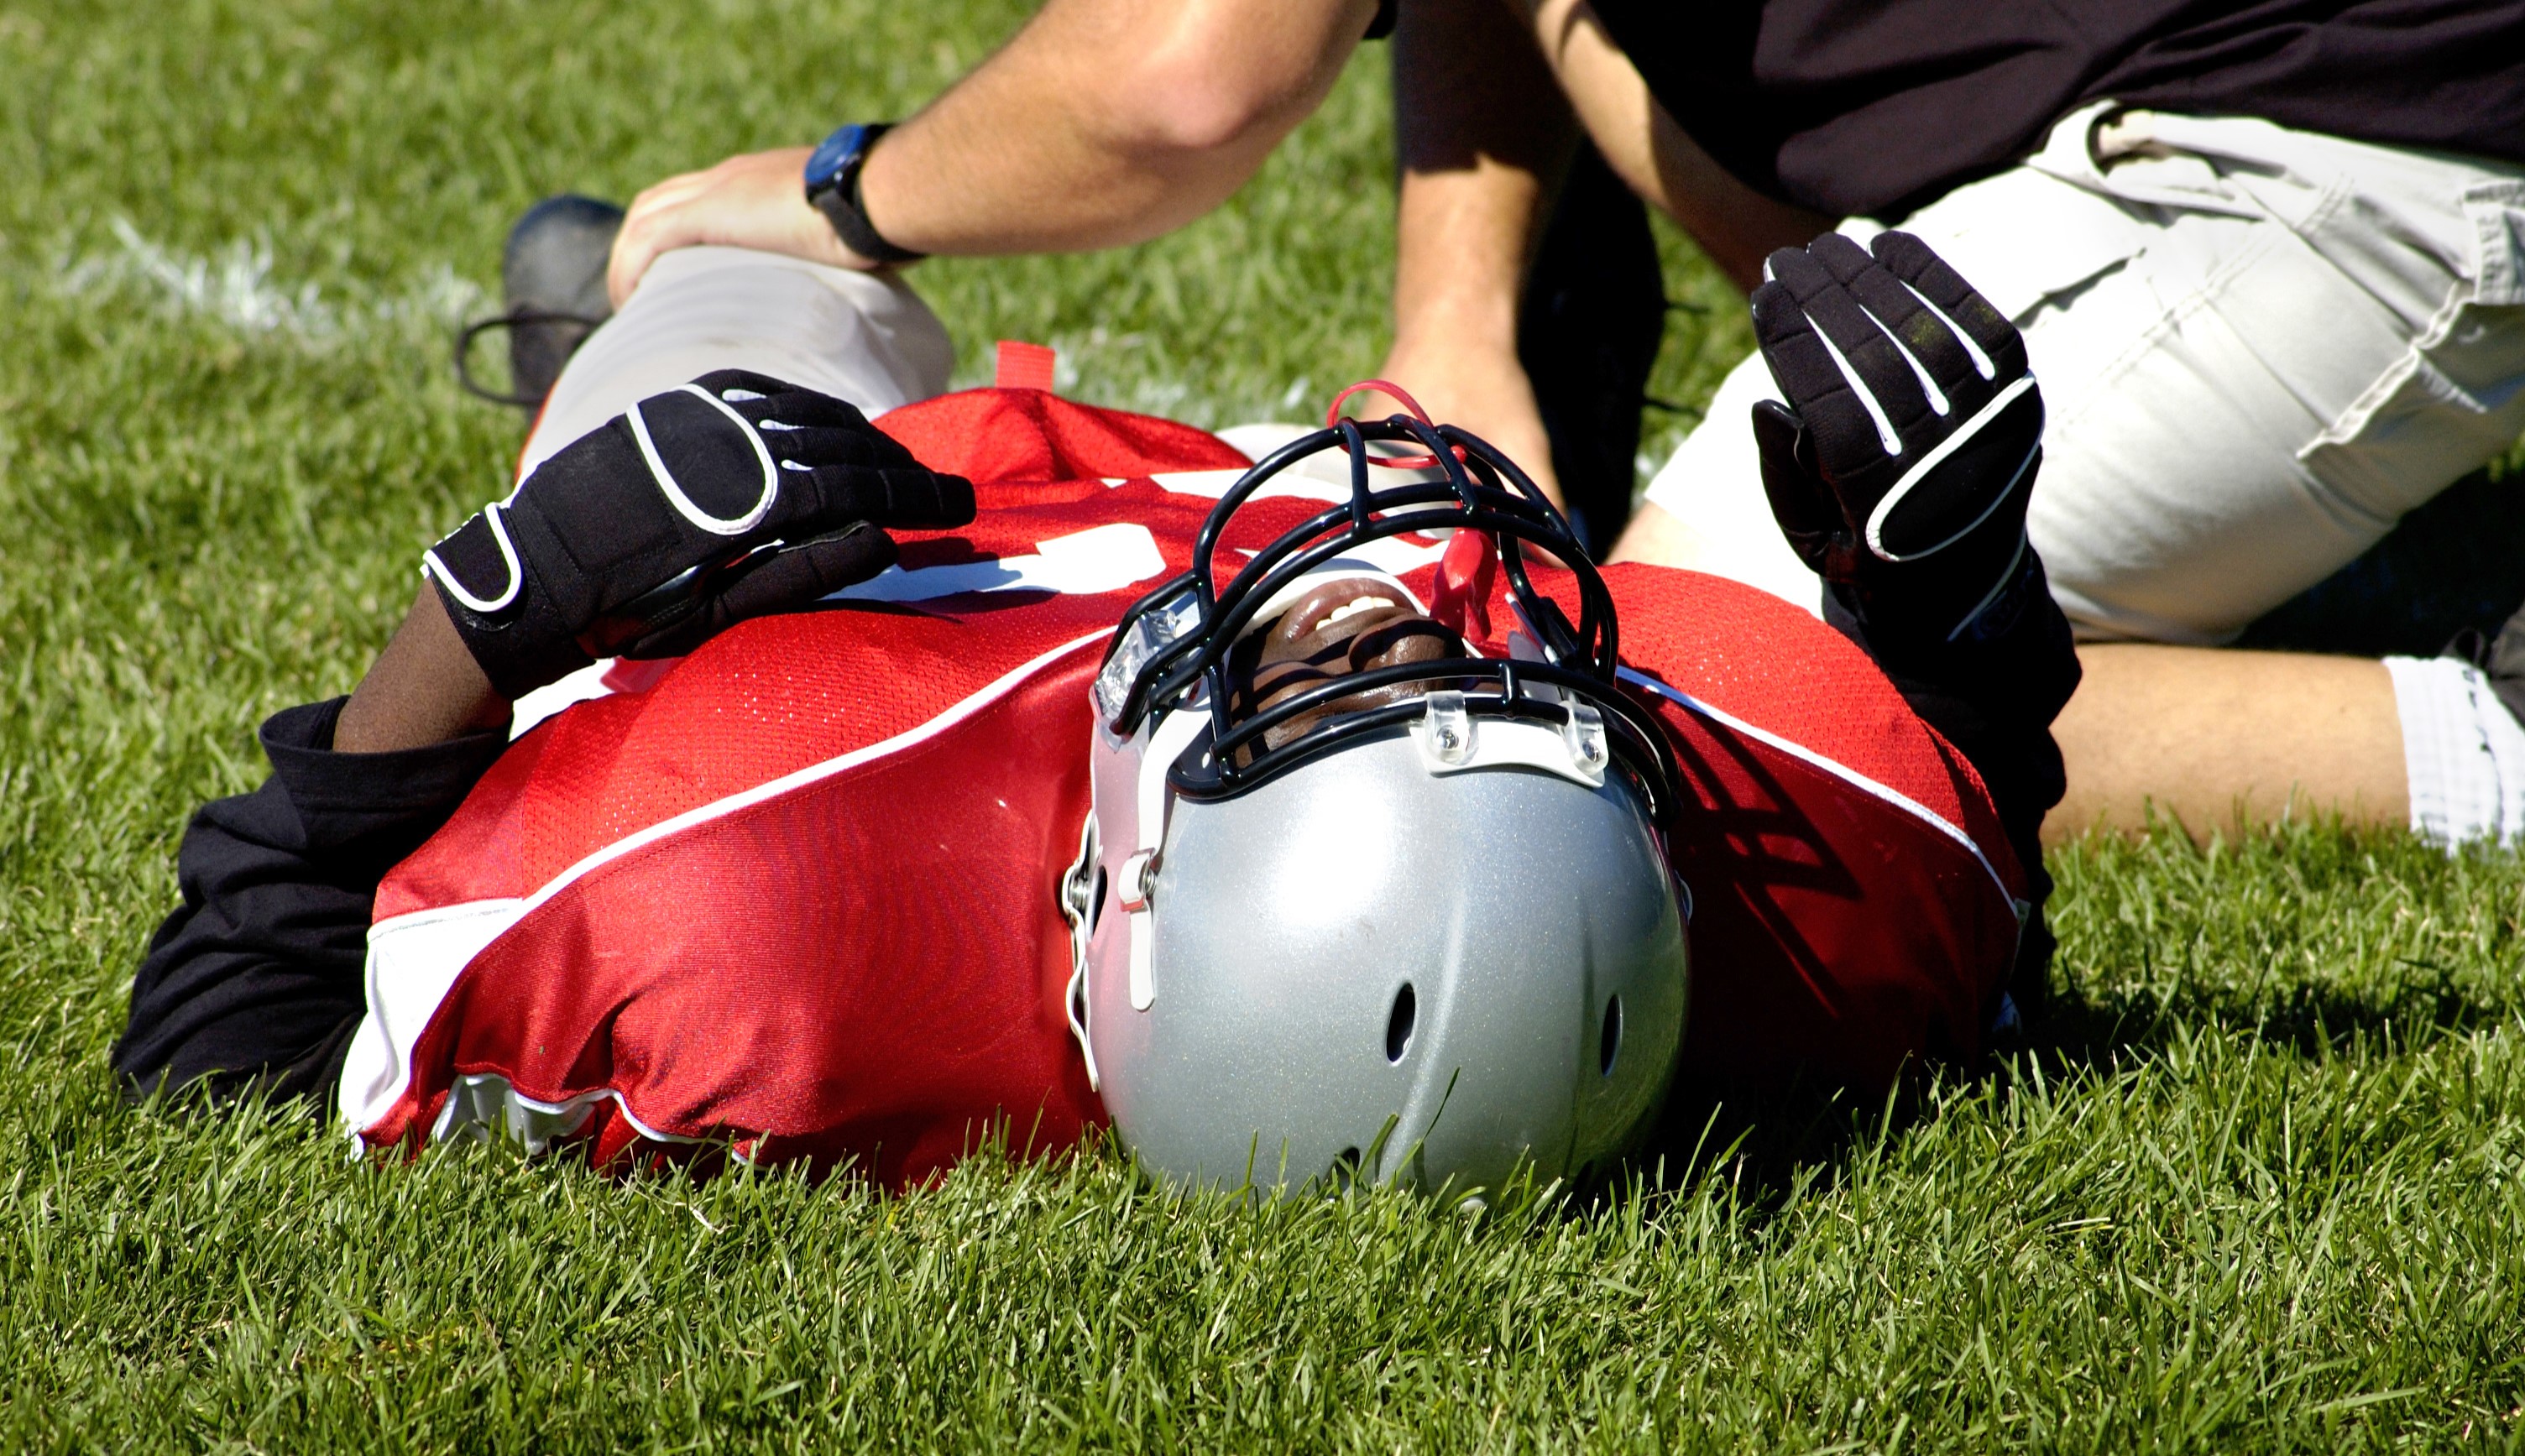 injured football player receiving treatment on the field